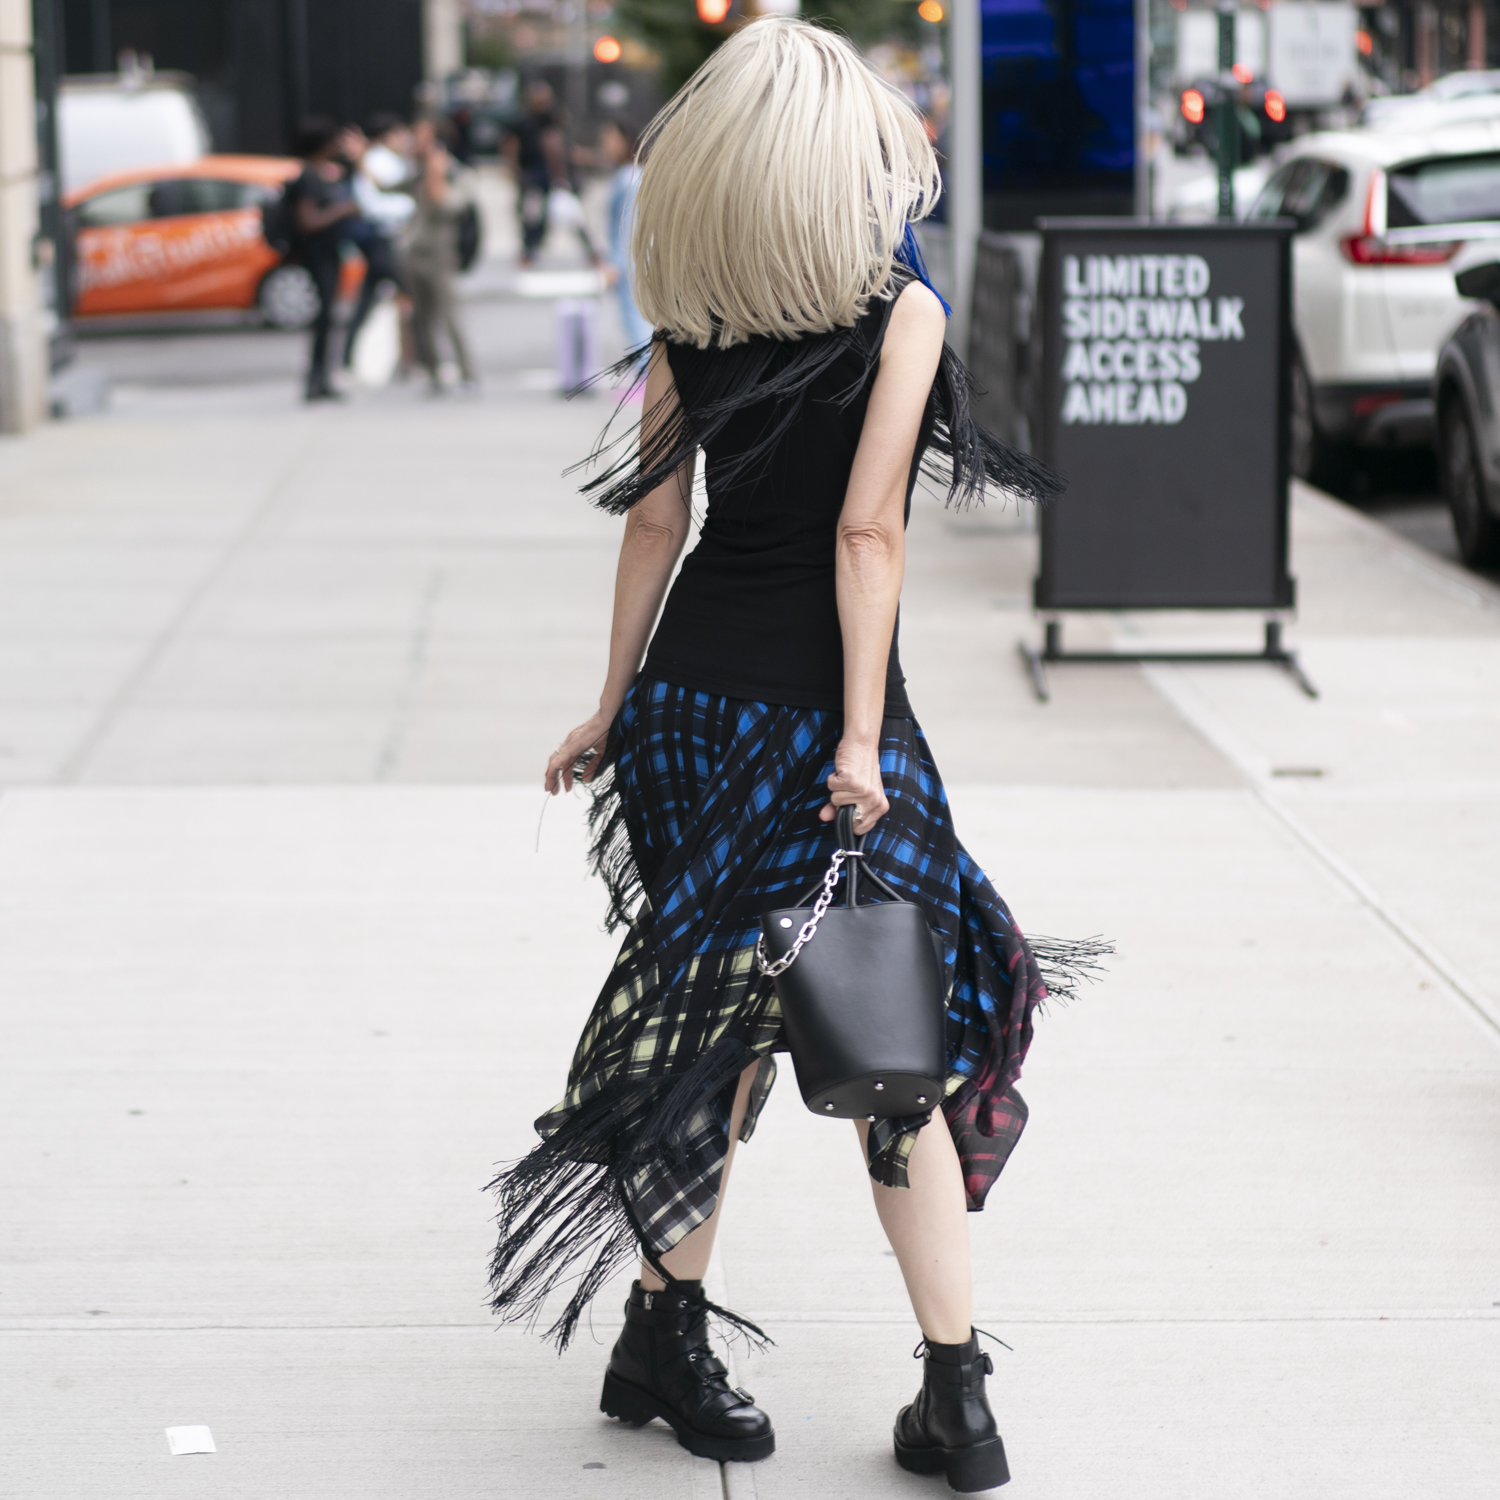 bloggers over 50 at NYFW, street style at NYFW